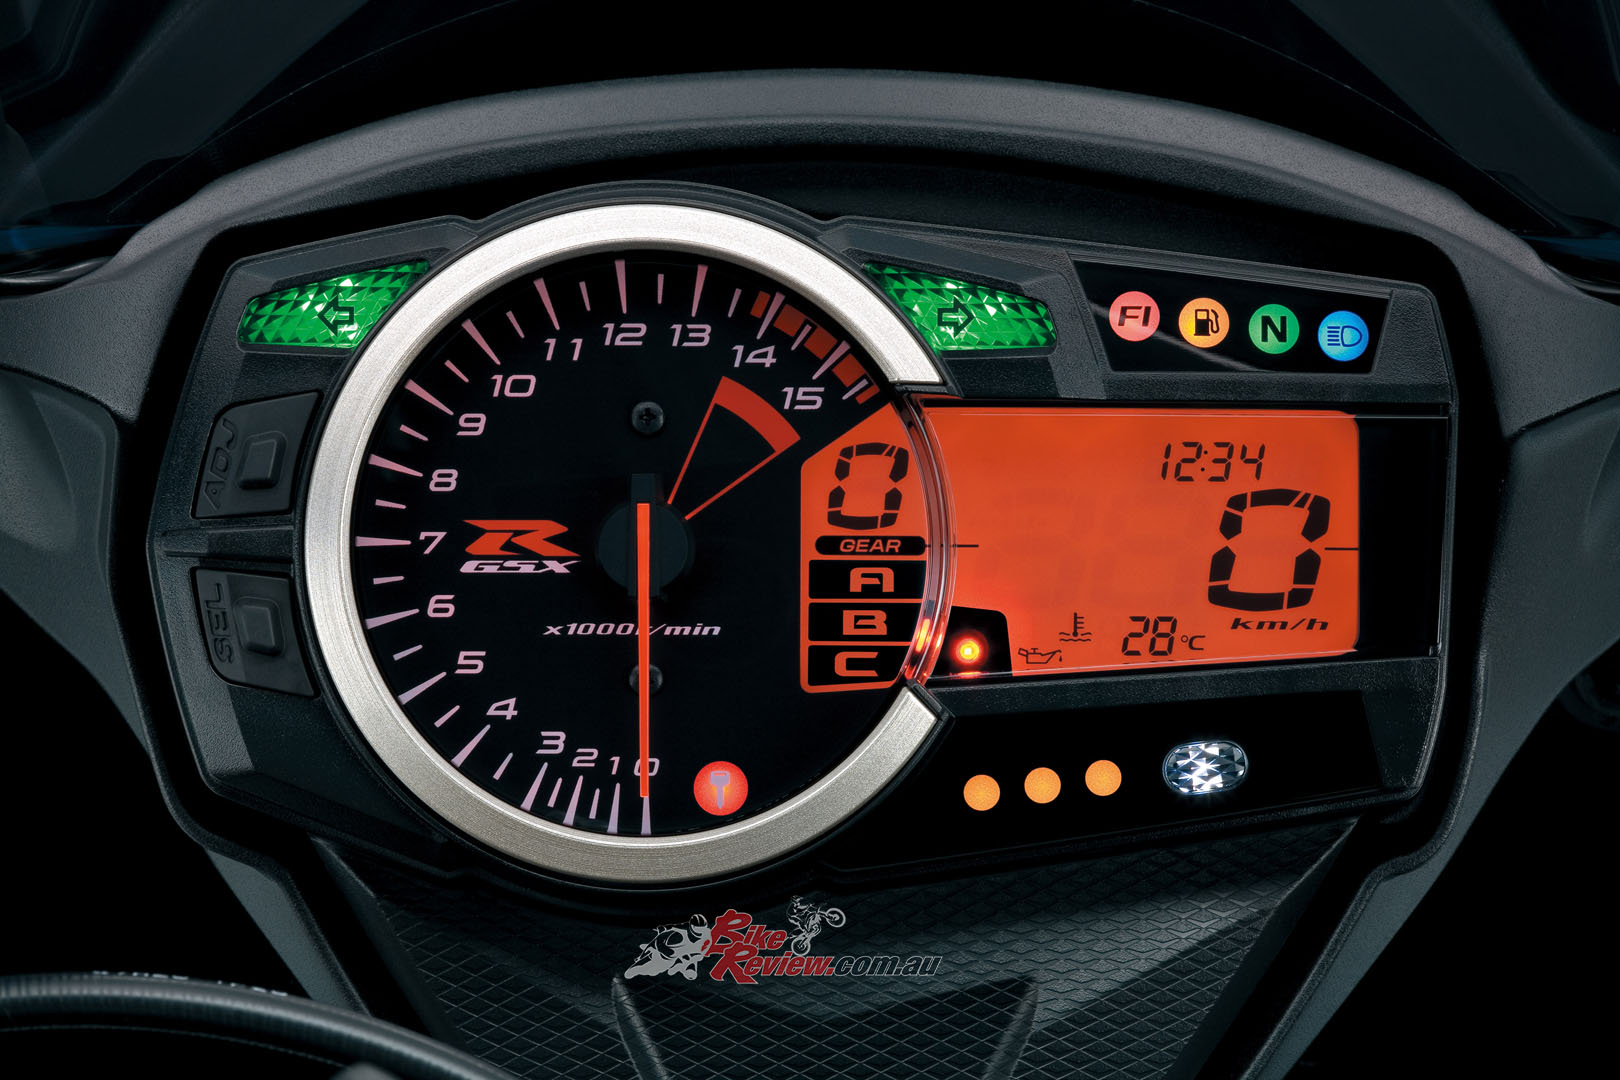 LCD readouts included an odometer, dual trip meters, reserve trip meter, clock, brightness adjustability, coolant temp, oil warning indicator, drive mode selected, gear position speed, rpm, shift lights and a lap timer.